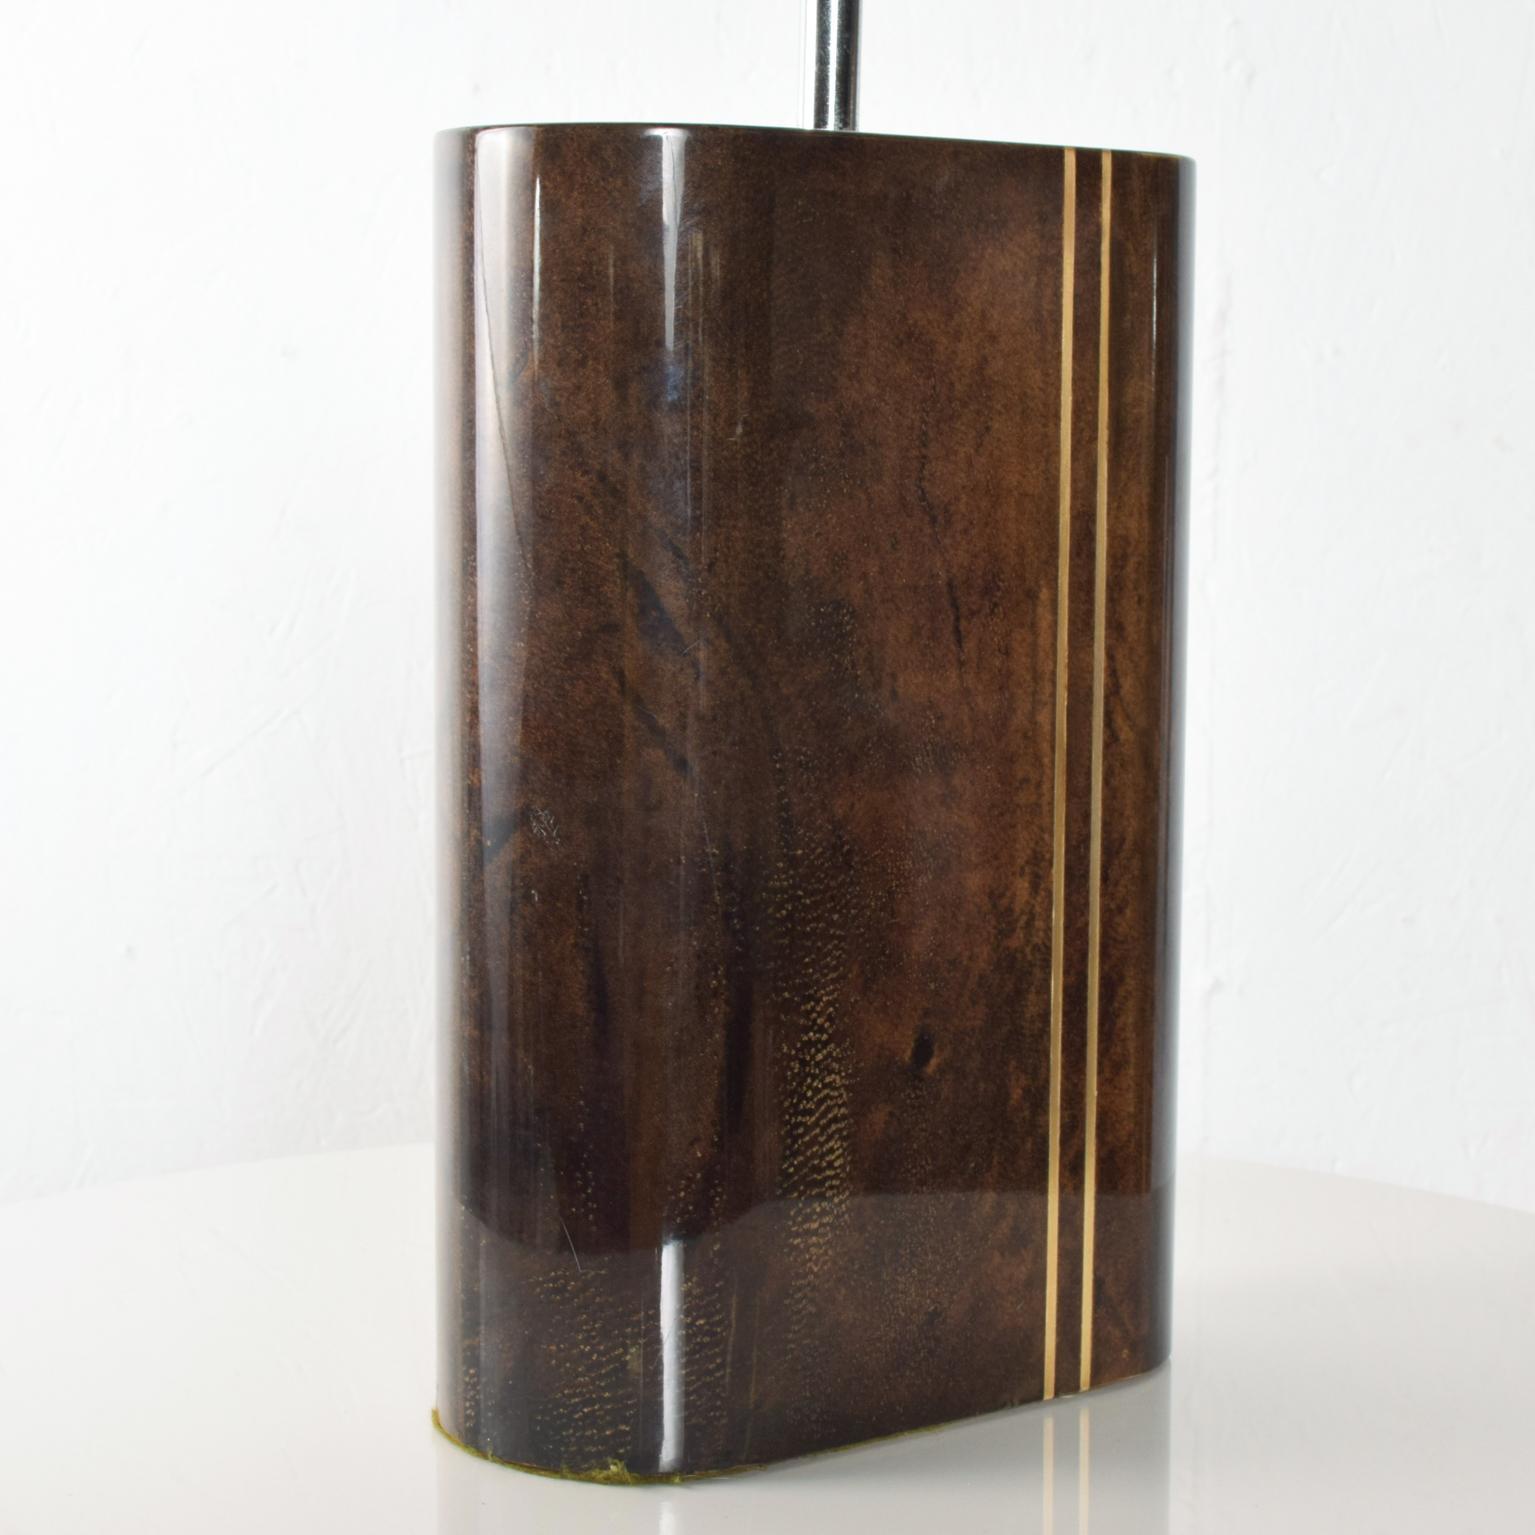 For your consideration a beautiful in near mint condition table lamp with an oval shape. Wood covered in goatskin brown tone with two metal inserts and high gloss polyester finish. Chrome-plated hardware. The lamp has been tested and currently